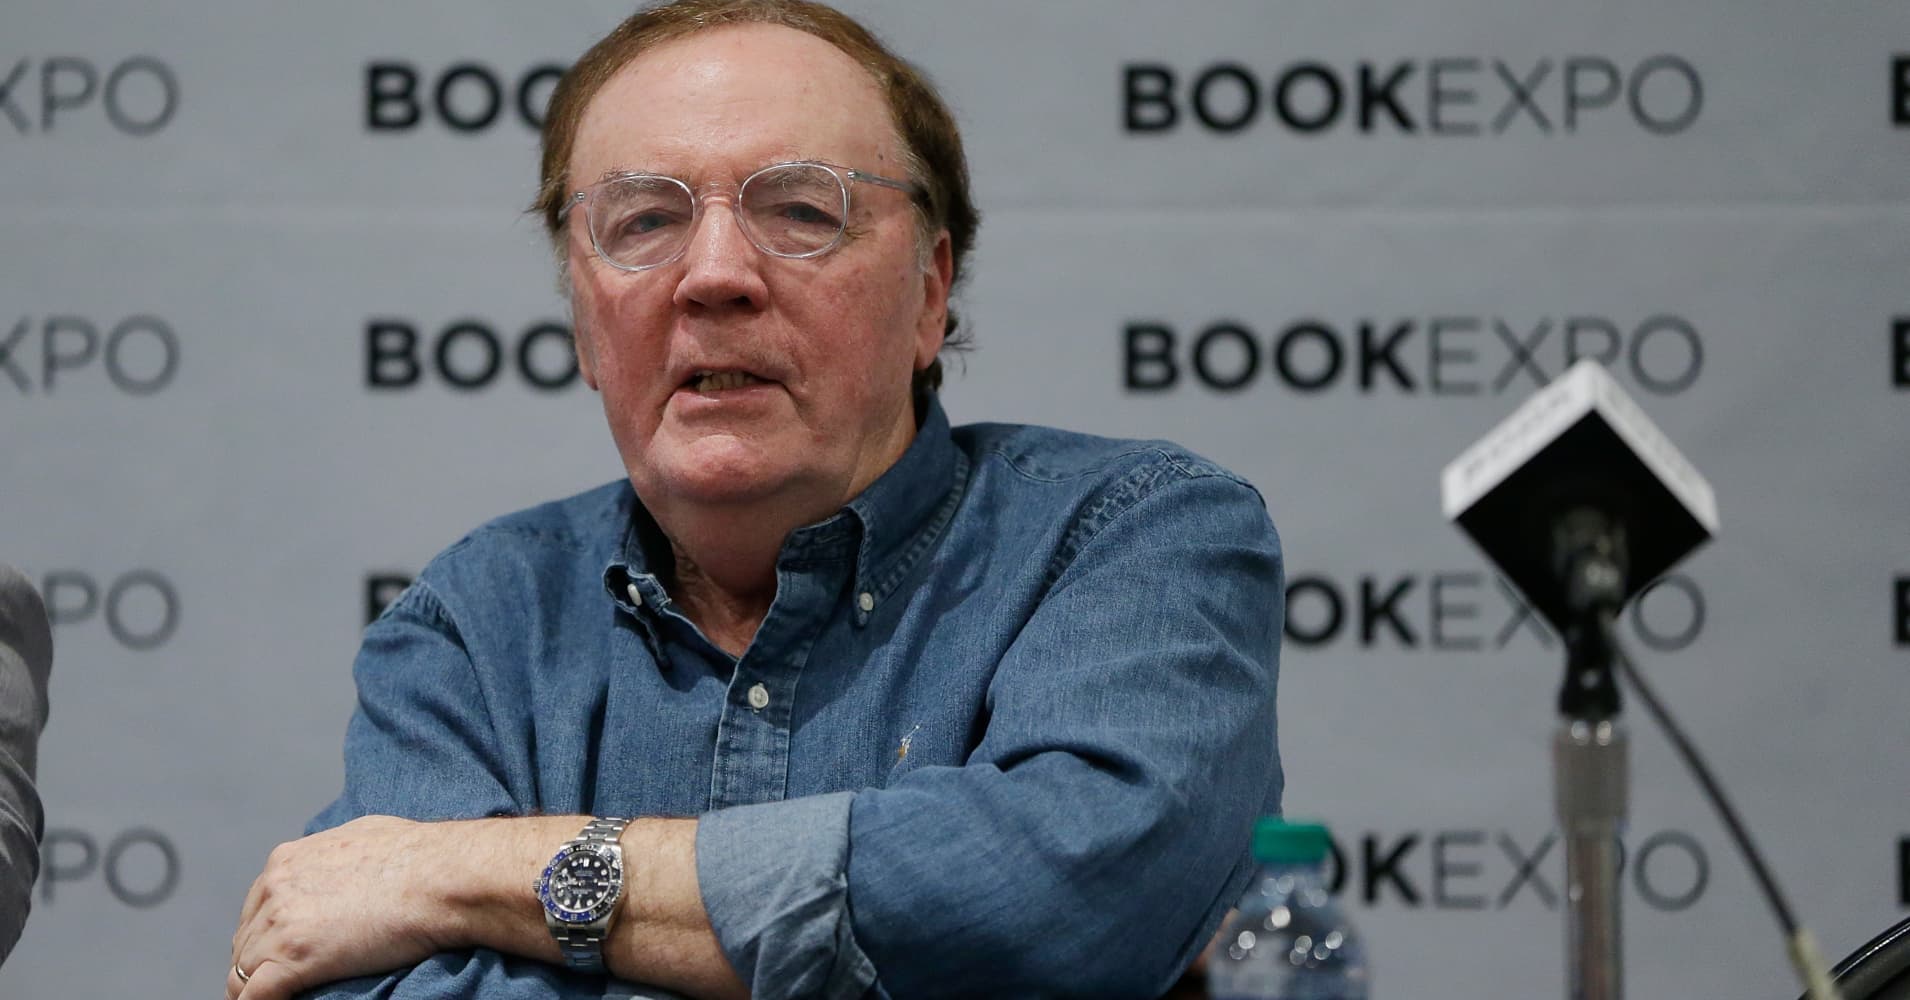 James Patterson on his new Facebook Messenger digital book: 'You've never seen anything like it'